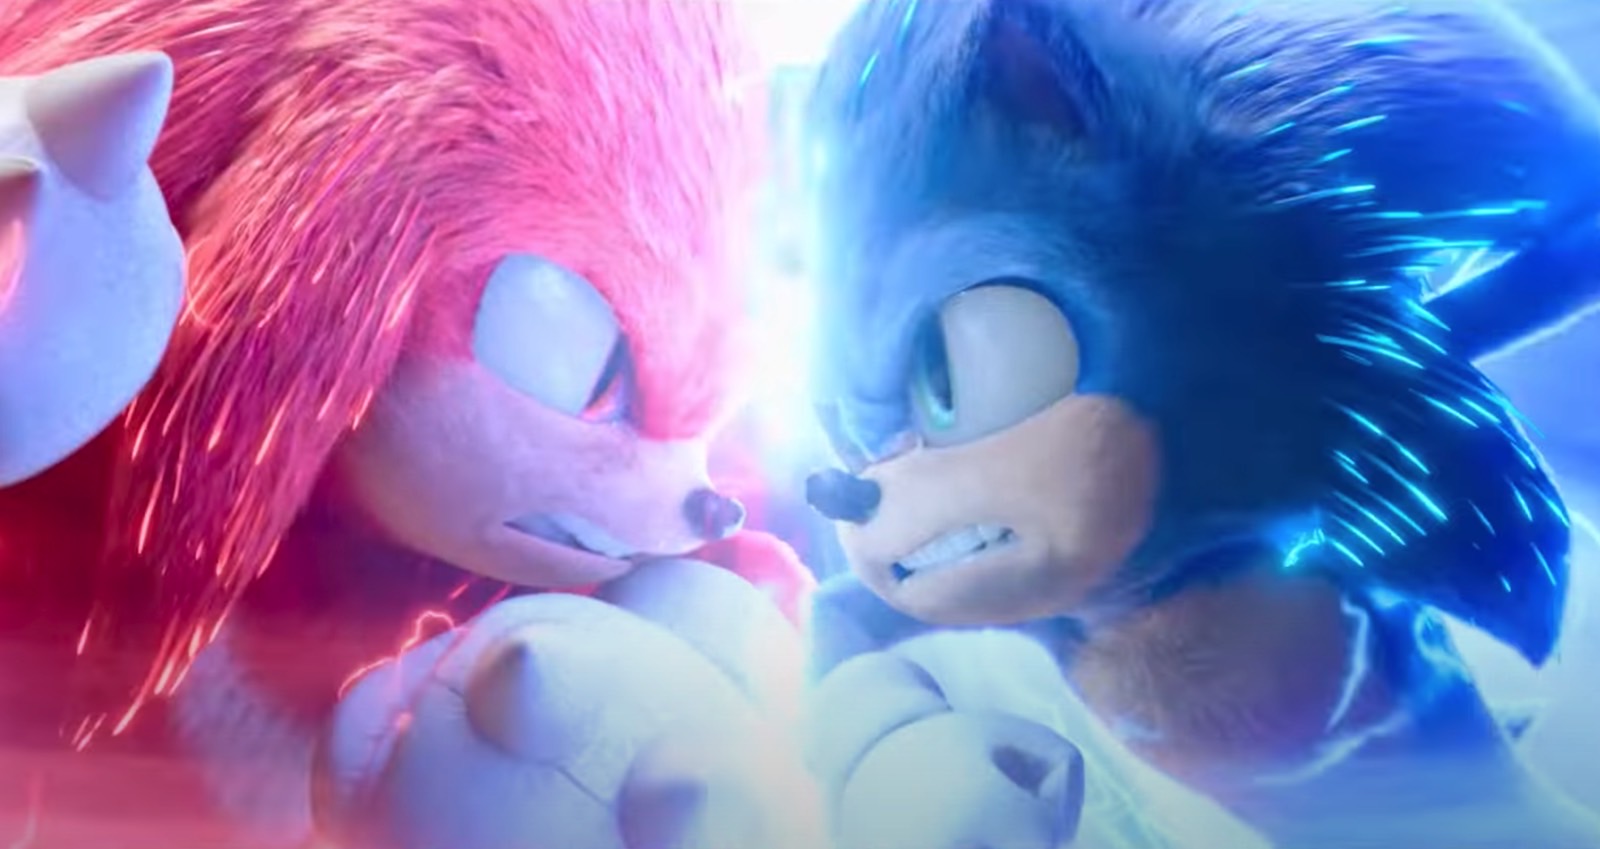 Sonic the Hedgehog 2 Official Final Trailer